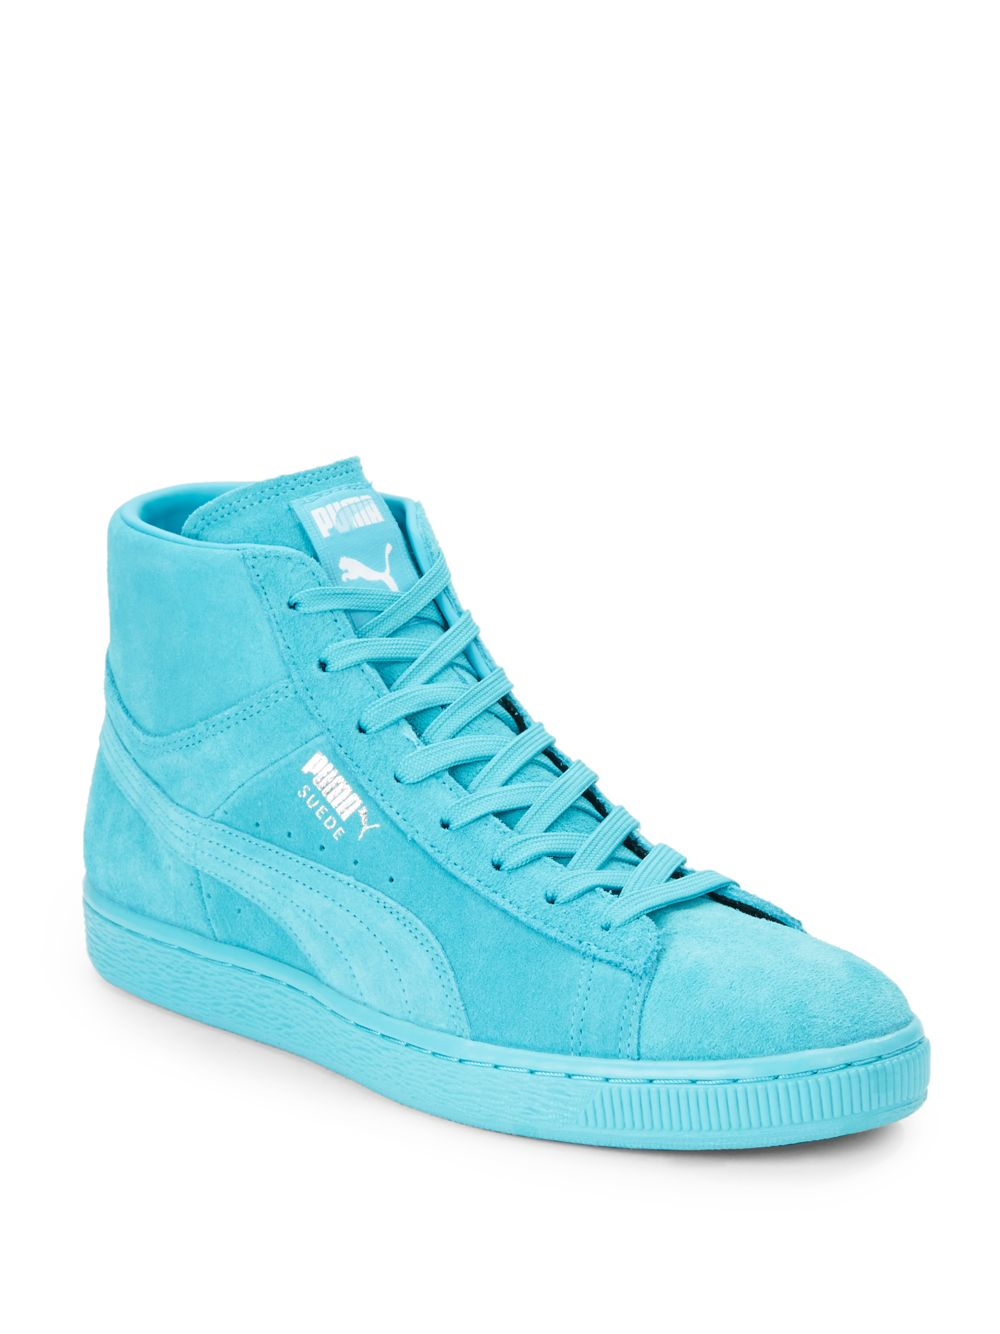 Lyst - Puma Suede Mid Classic High-Top Sneakers in Blue for Men